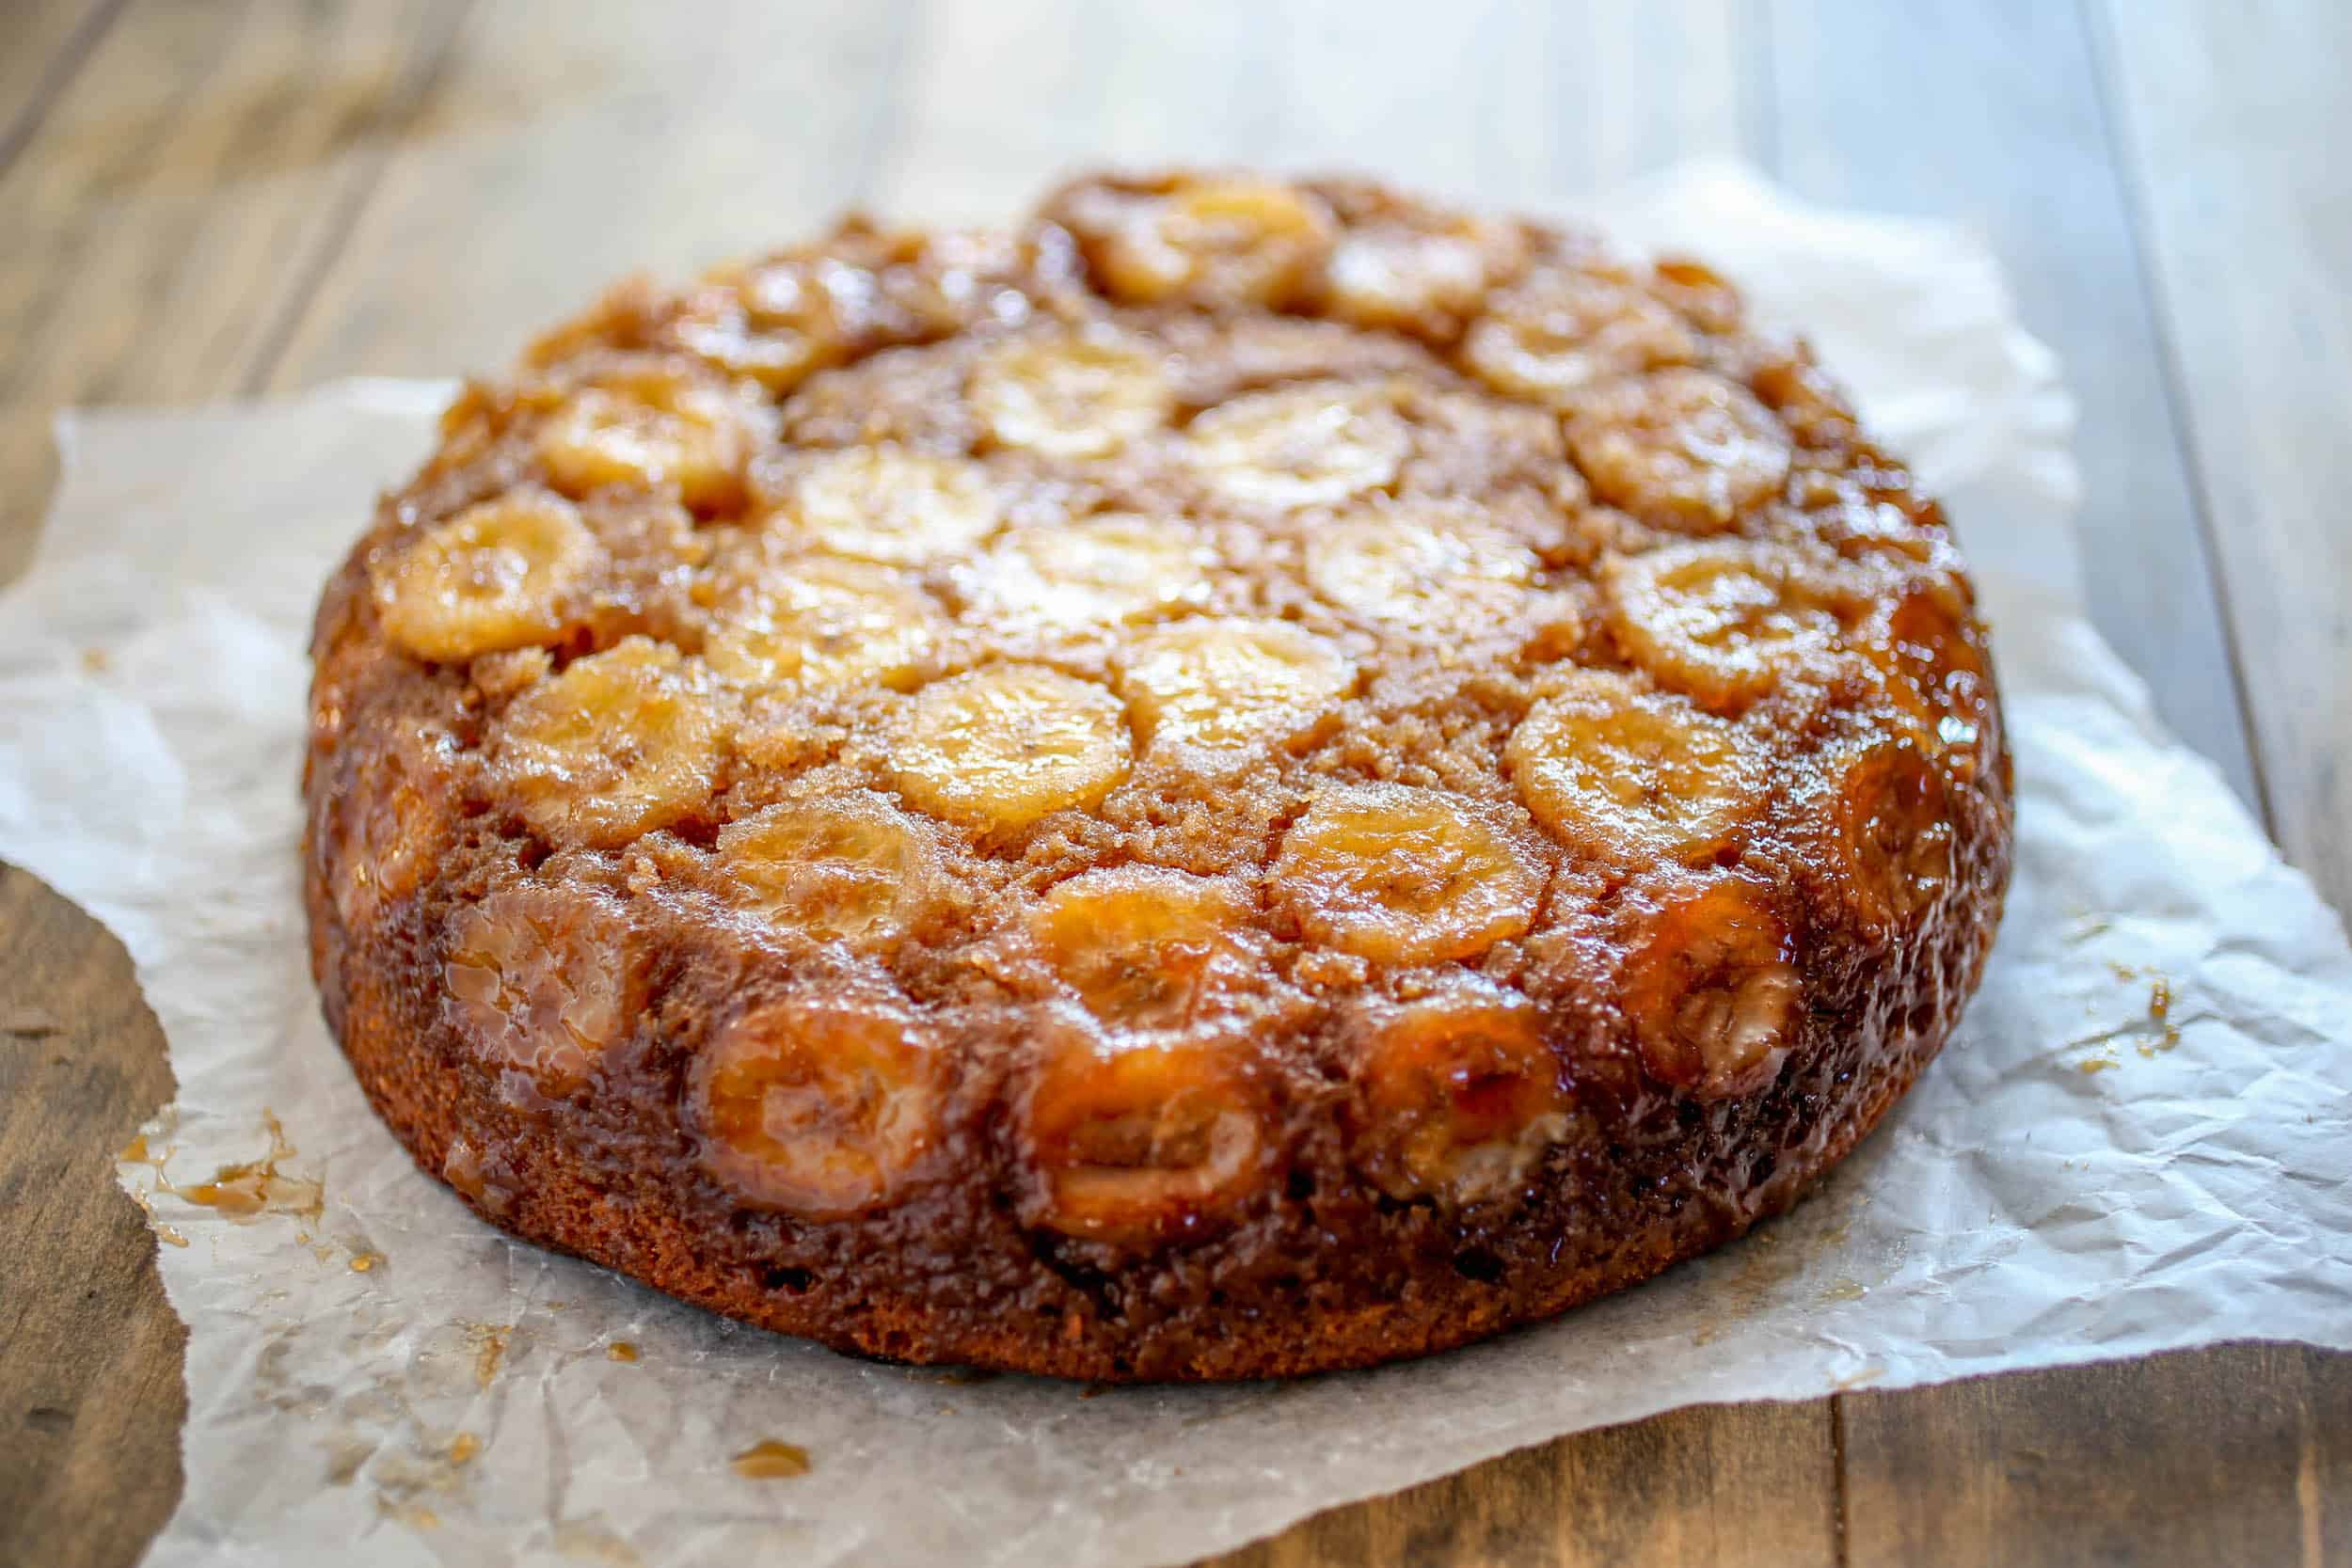 Spiced Upside Down Banana Cake - Lightly spiced and topped with fresh bananas and caramelized brown sugar, this Banana Upside Down Cake is sure to be a winner.